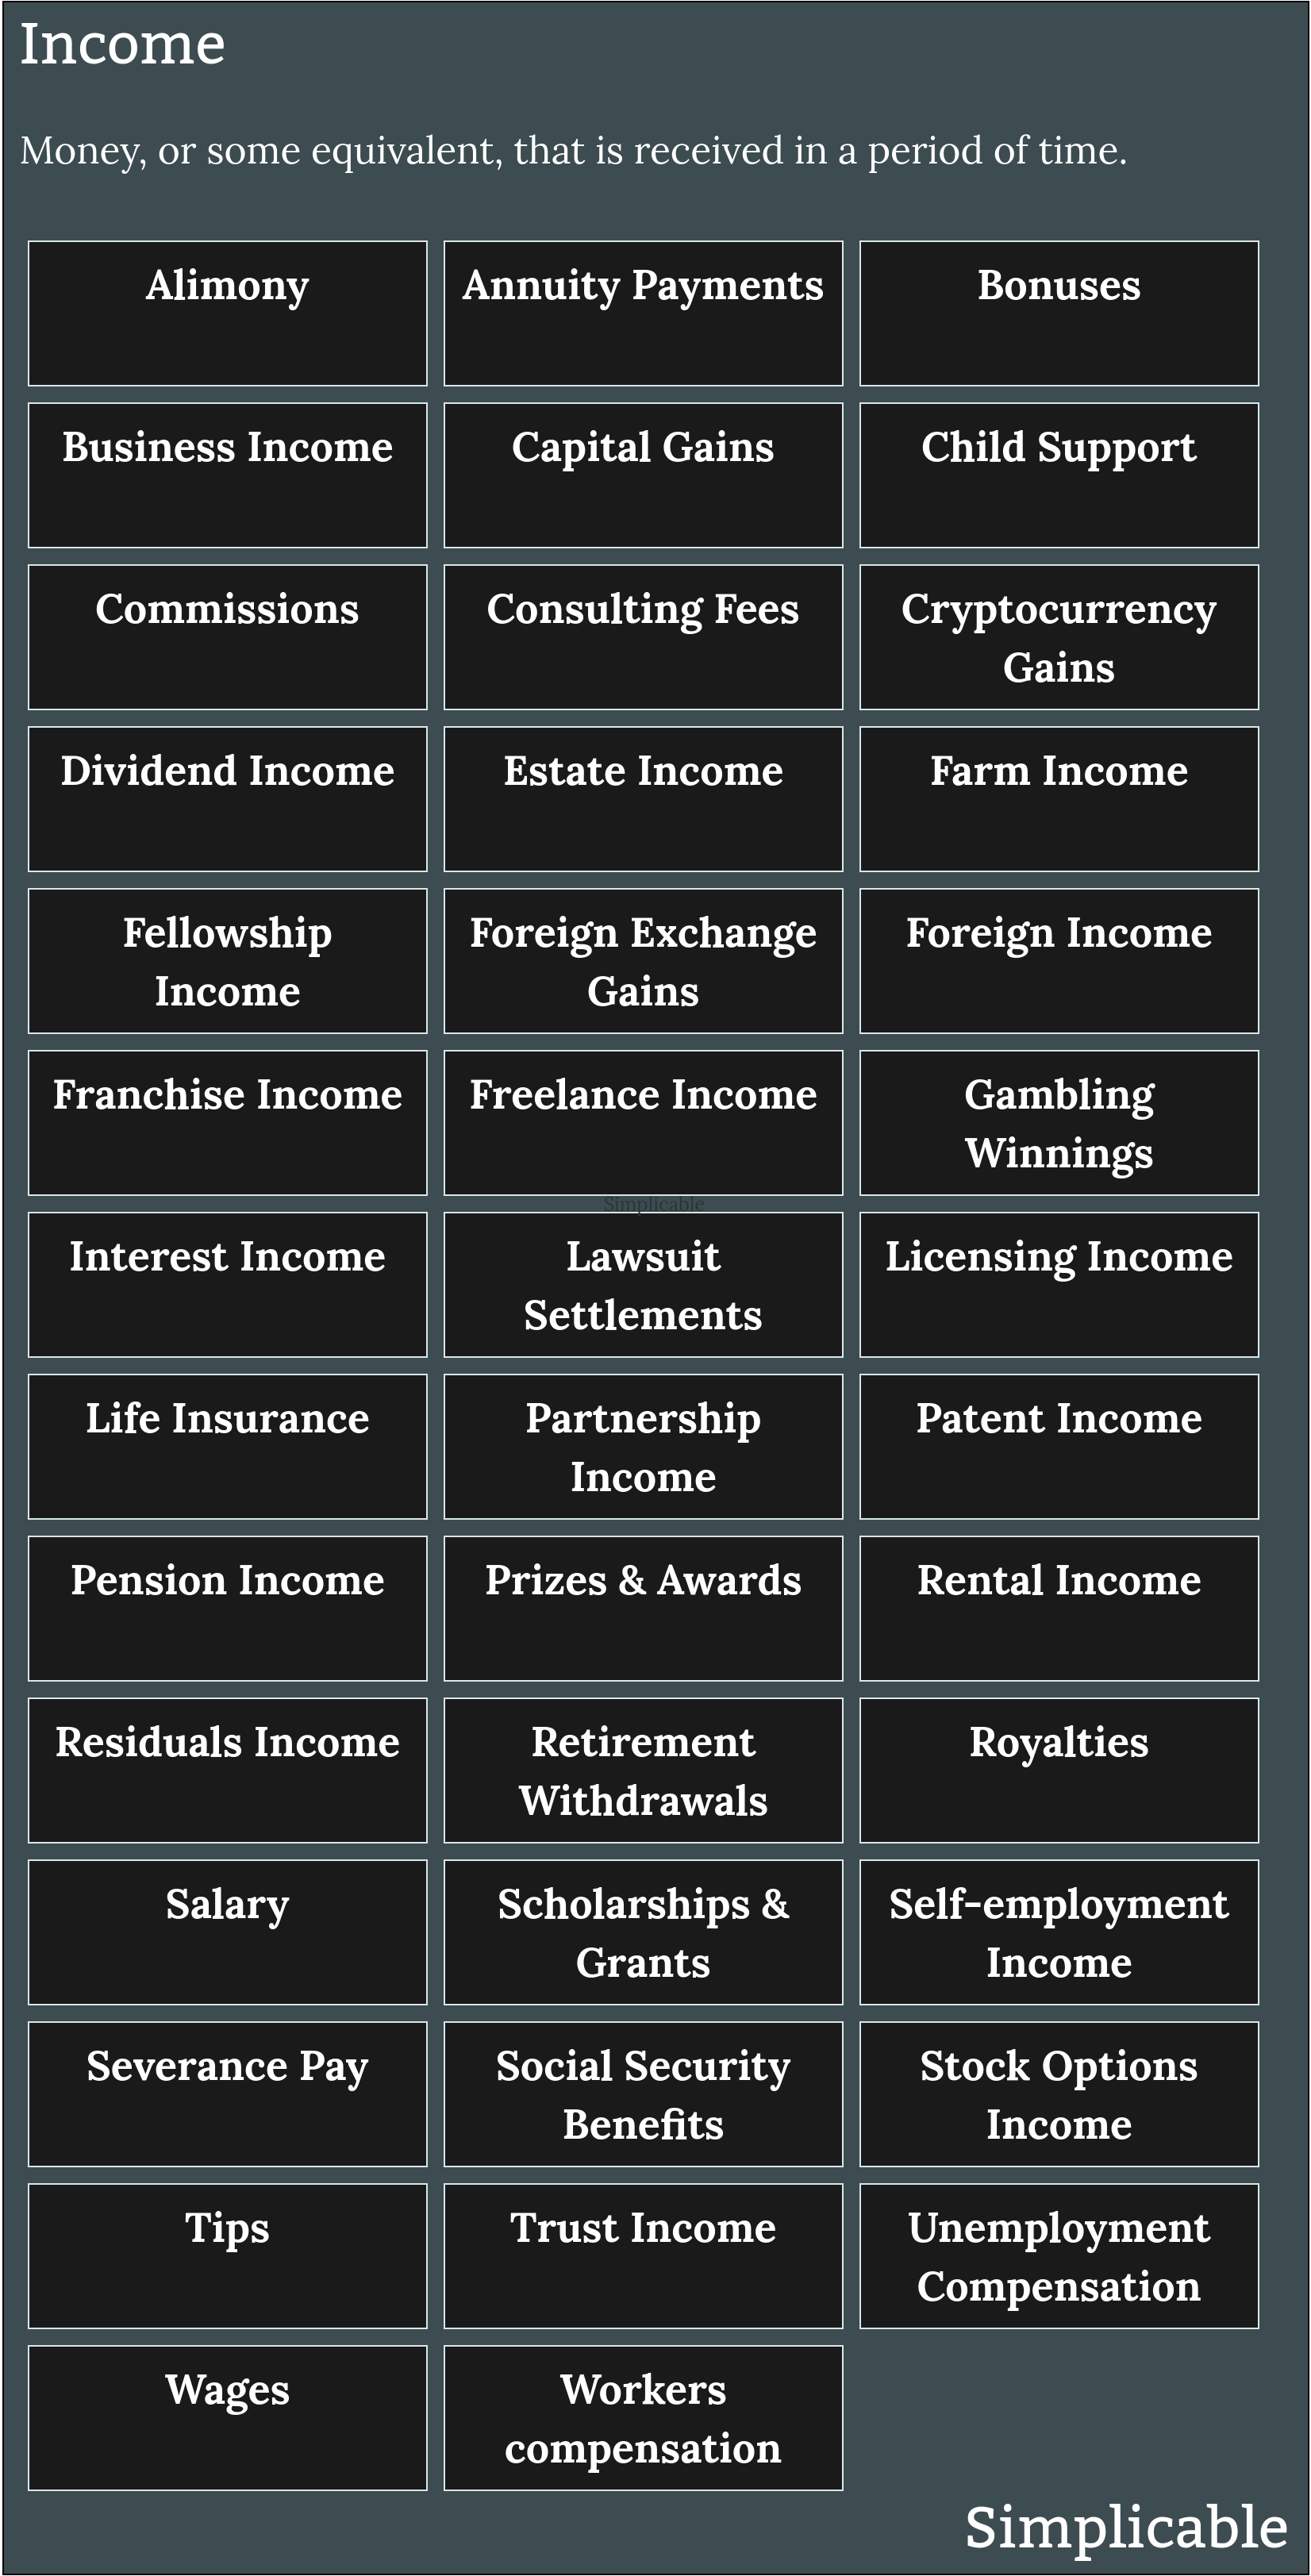 types of income